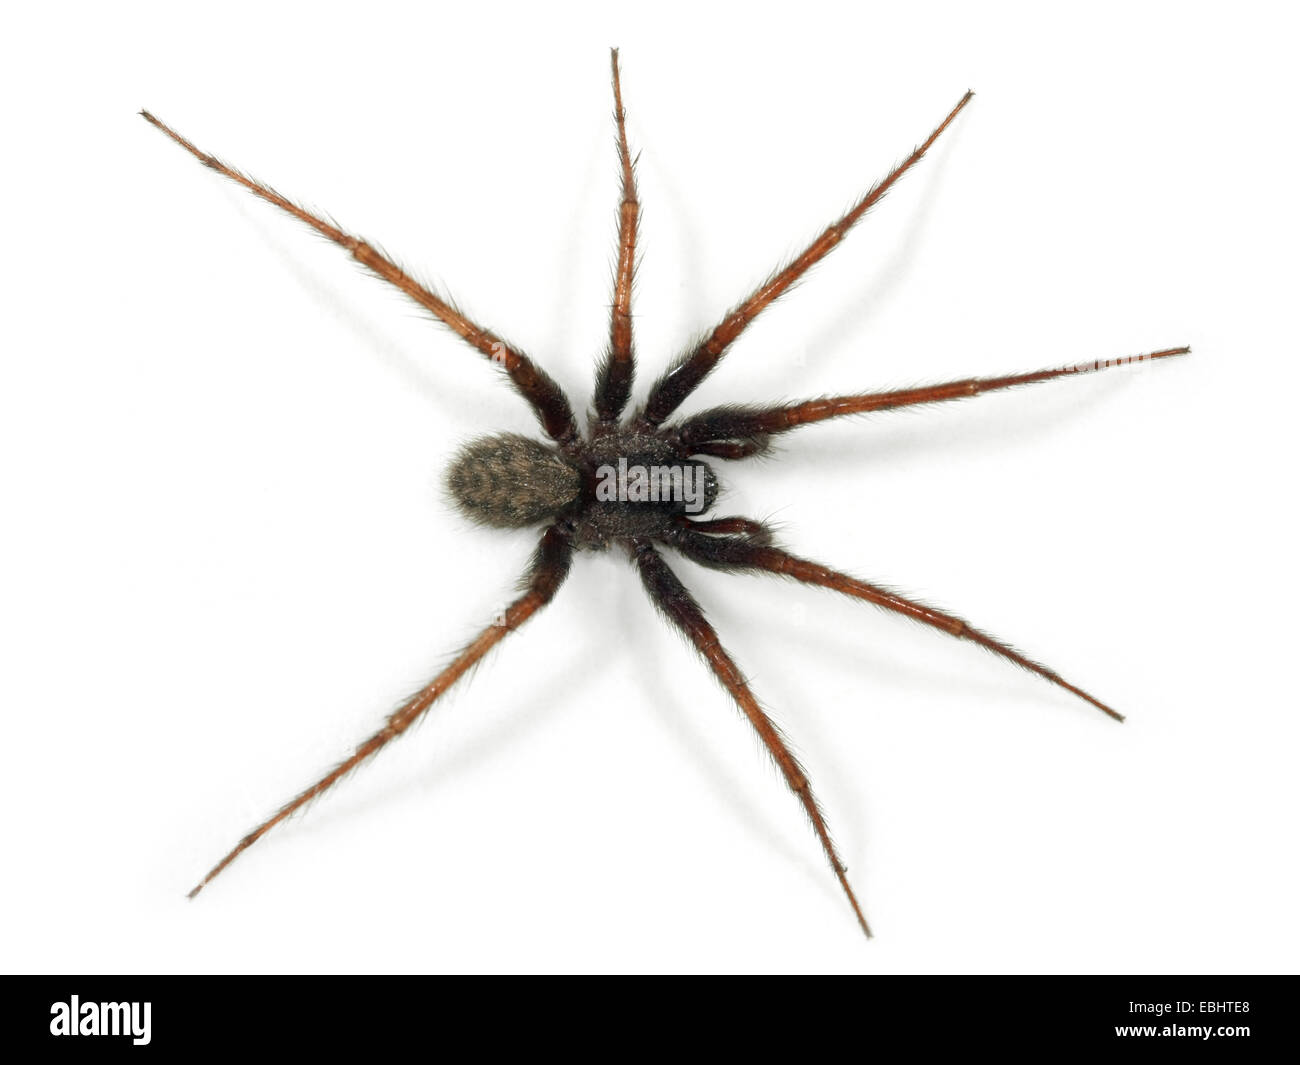 A male Common House-spider (Teganaria domestica), on a white background, part of the family Agelenidae - Funnel web weavers. Stock Photo